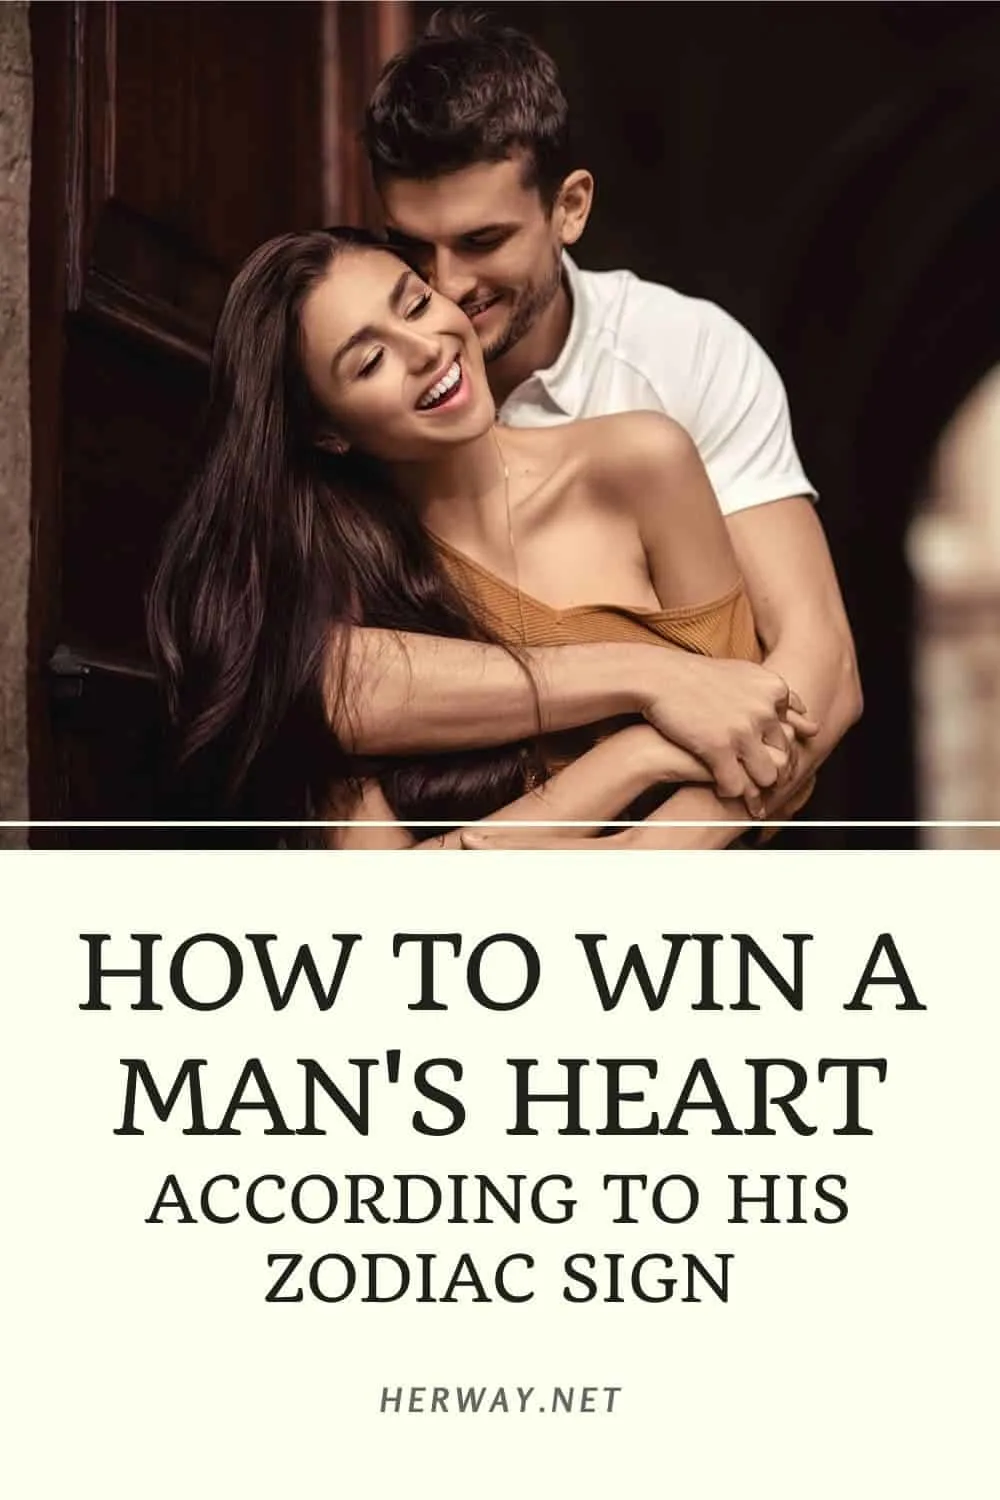 How To Win A Man's Heart According To His Zodiac Sign